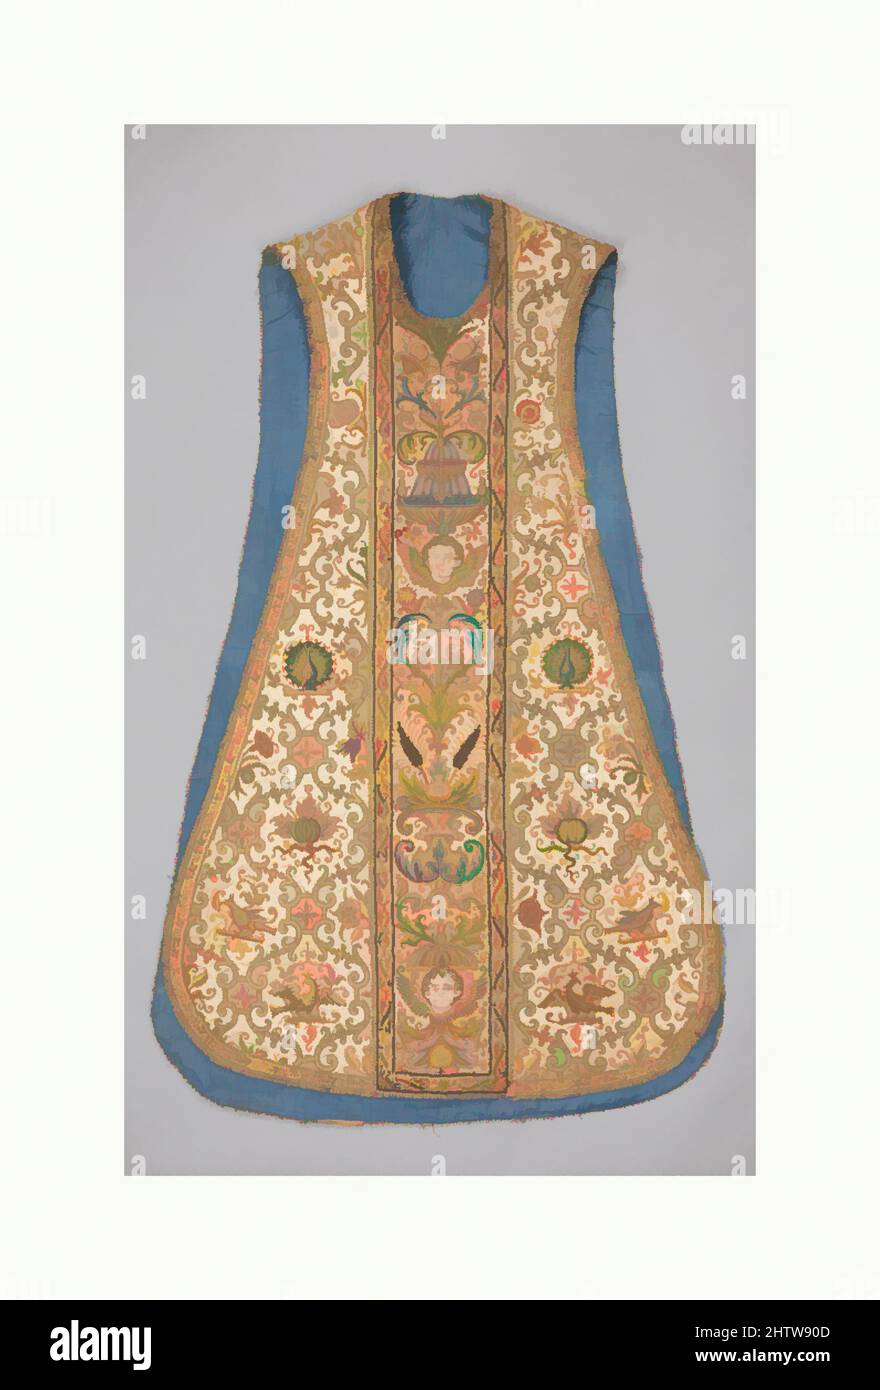 Art inspired by Chasuble, 16th century, French, Canvas, silk and metal thread, L. 49 1/2 in. (125.7 cm), Textiles-Embroidered, Classic works modernized by Artotop with a splash of modernity. Shapes, color and value, eye-catching visual impact on art. Emotions through freedom of artworks in a contemporary way. A timeless message pursuing a wildly creative new direction. Artists turning to the digital medium and creating the Artotop NFT Stock Photo